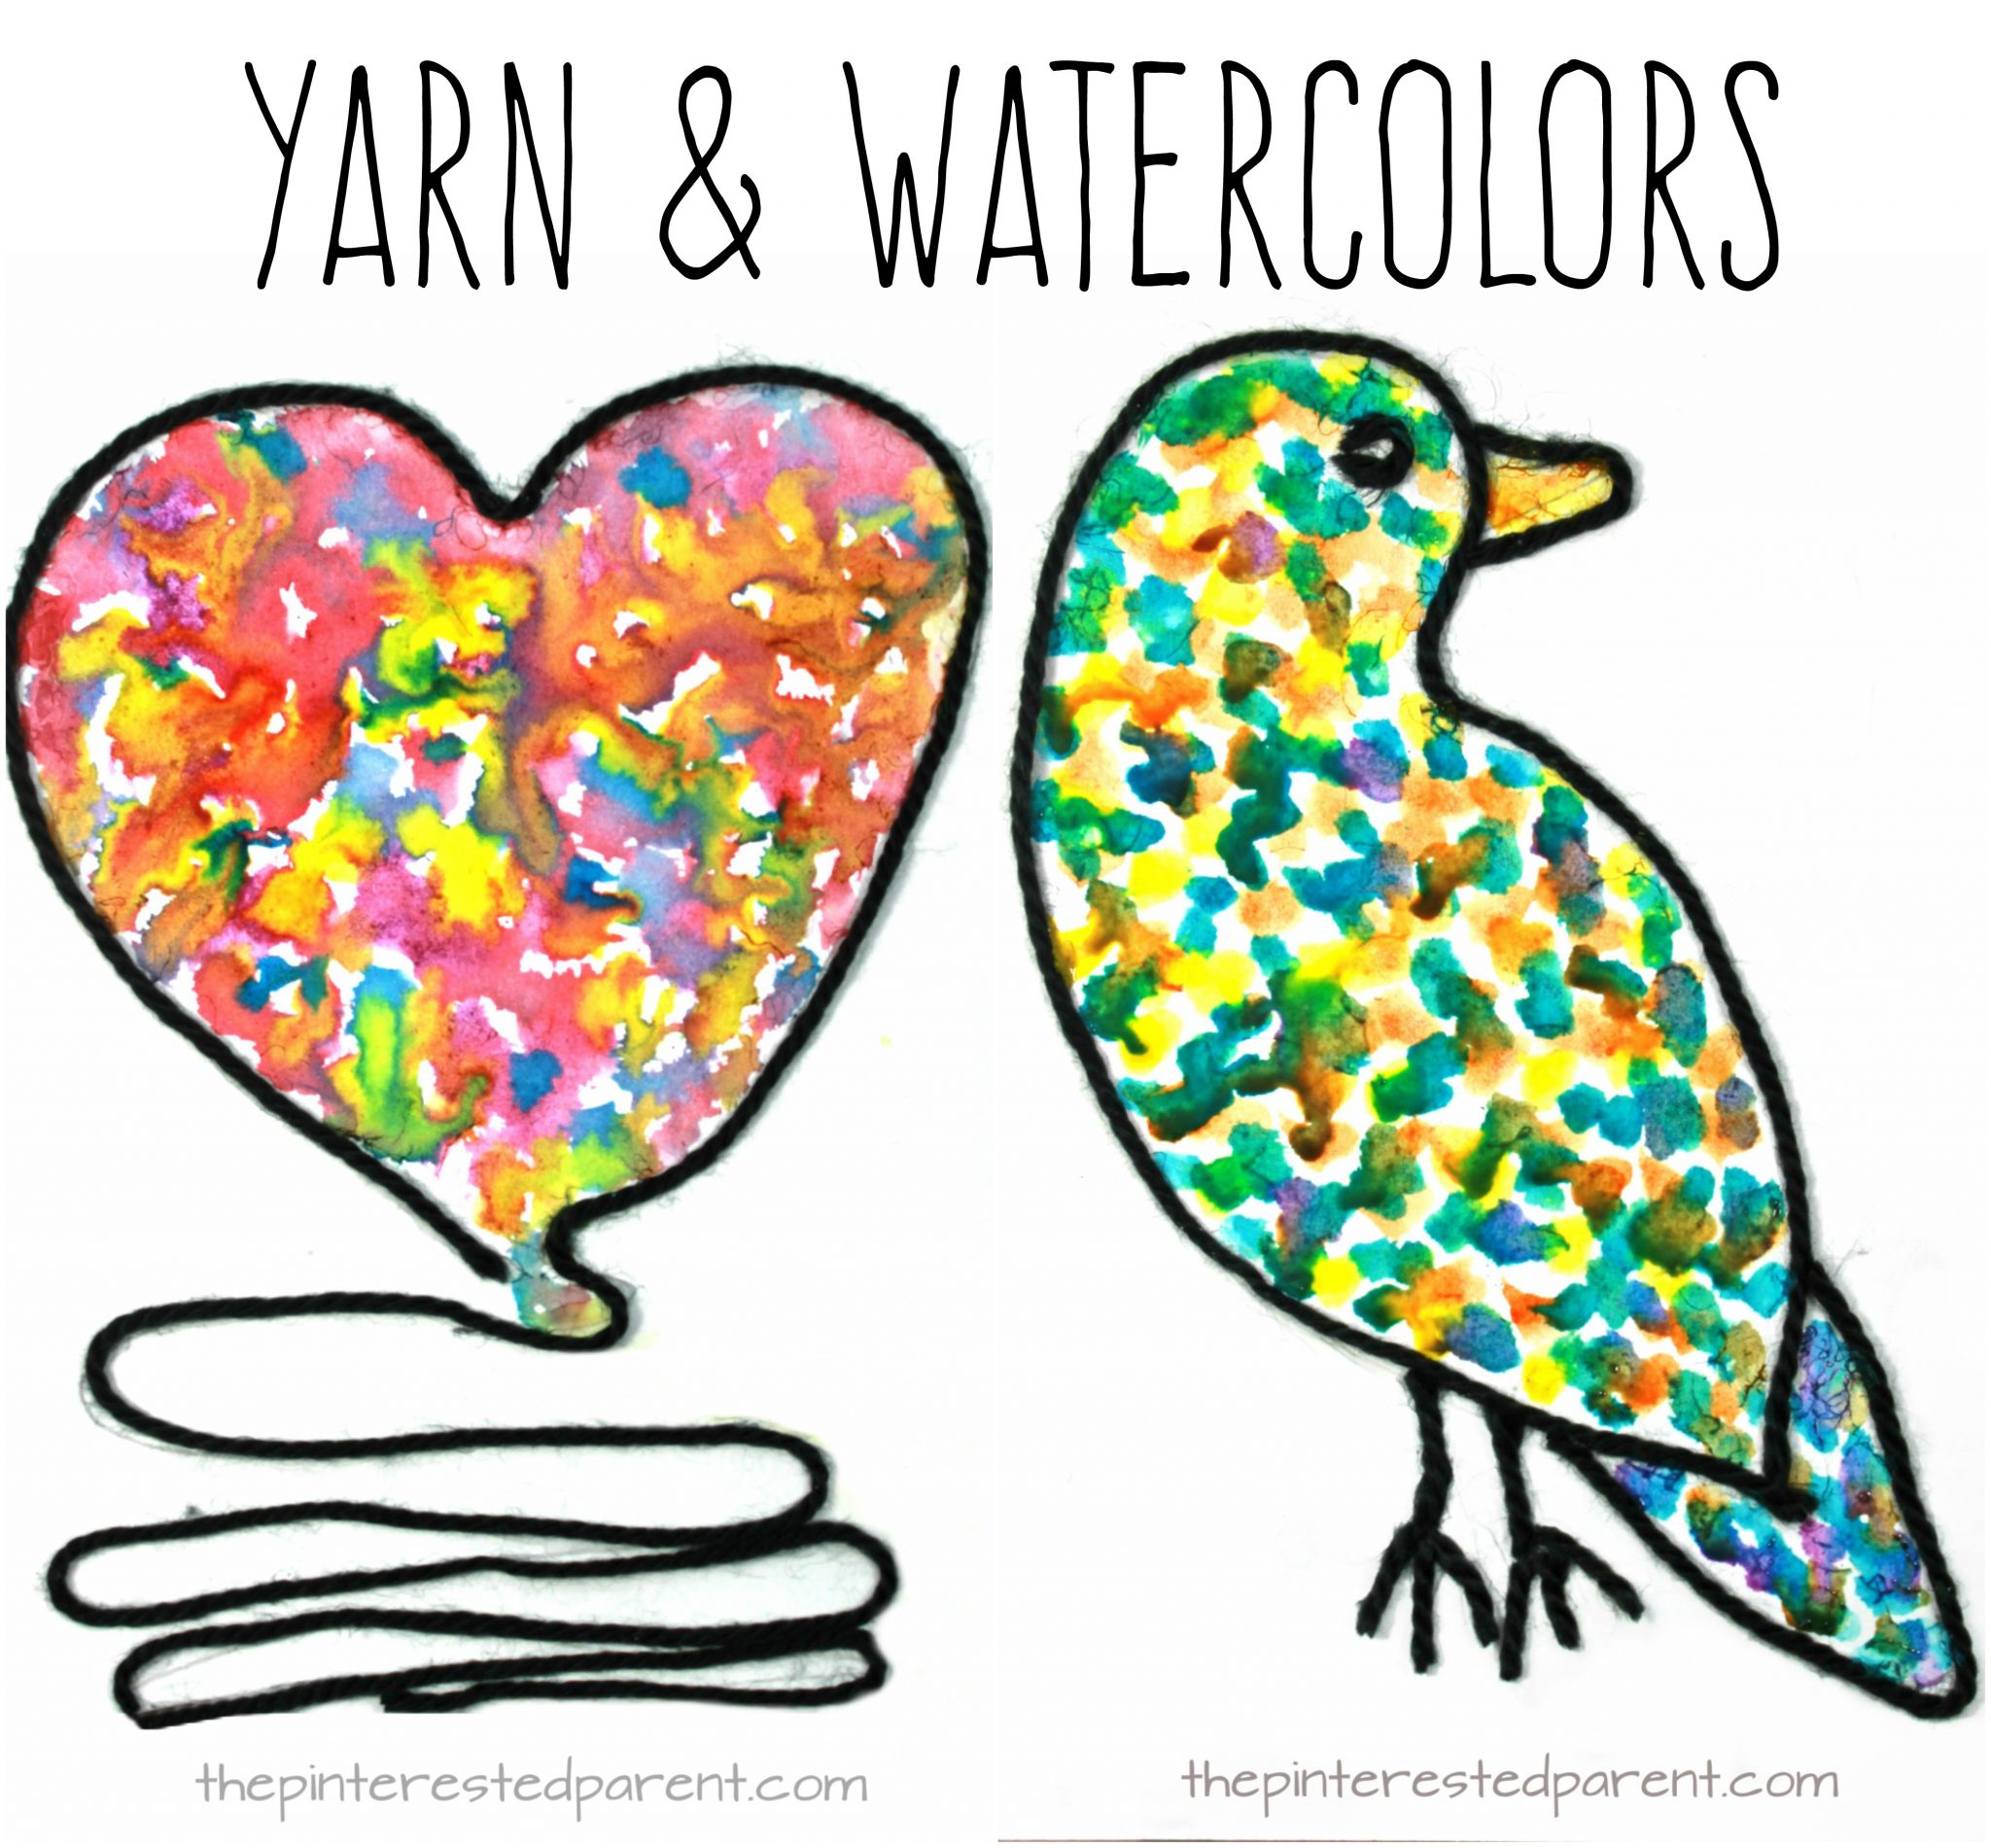 Inspired by the book 'Art & Max'. Yarn art and watercolor painting. Arts and crafts projects for kids.